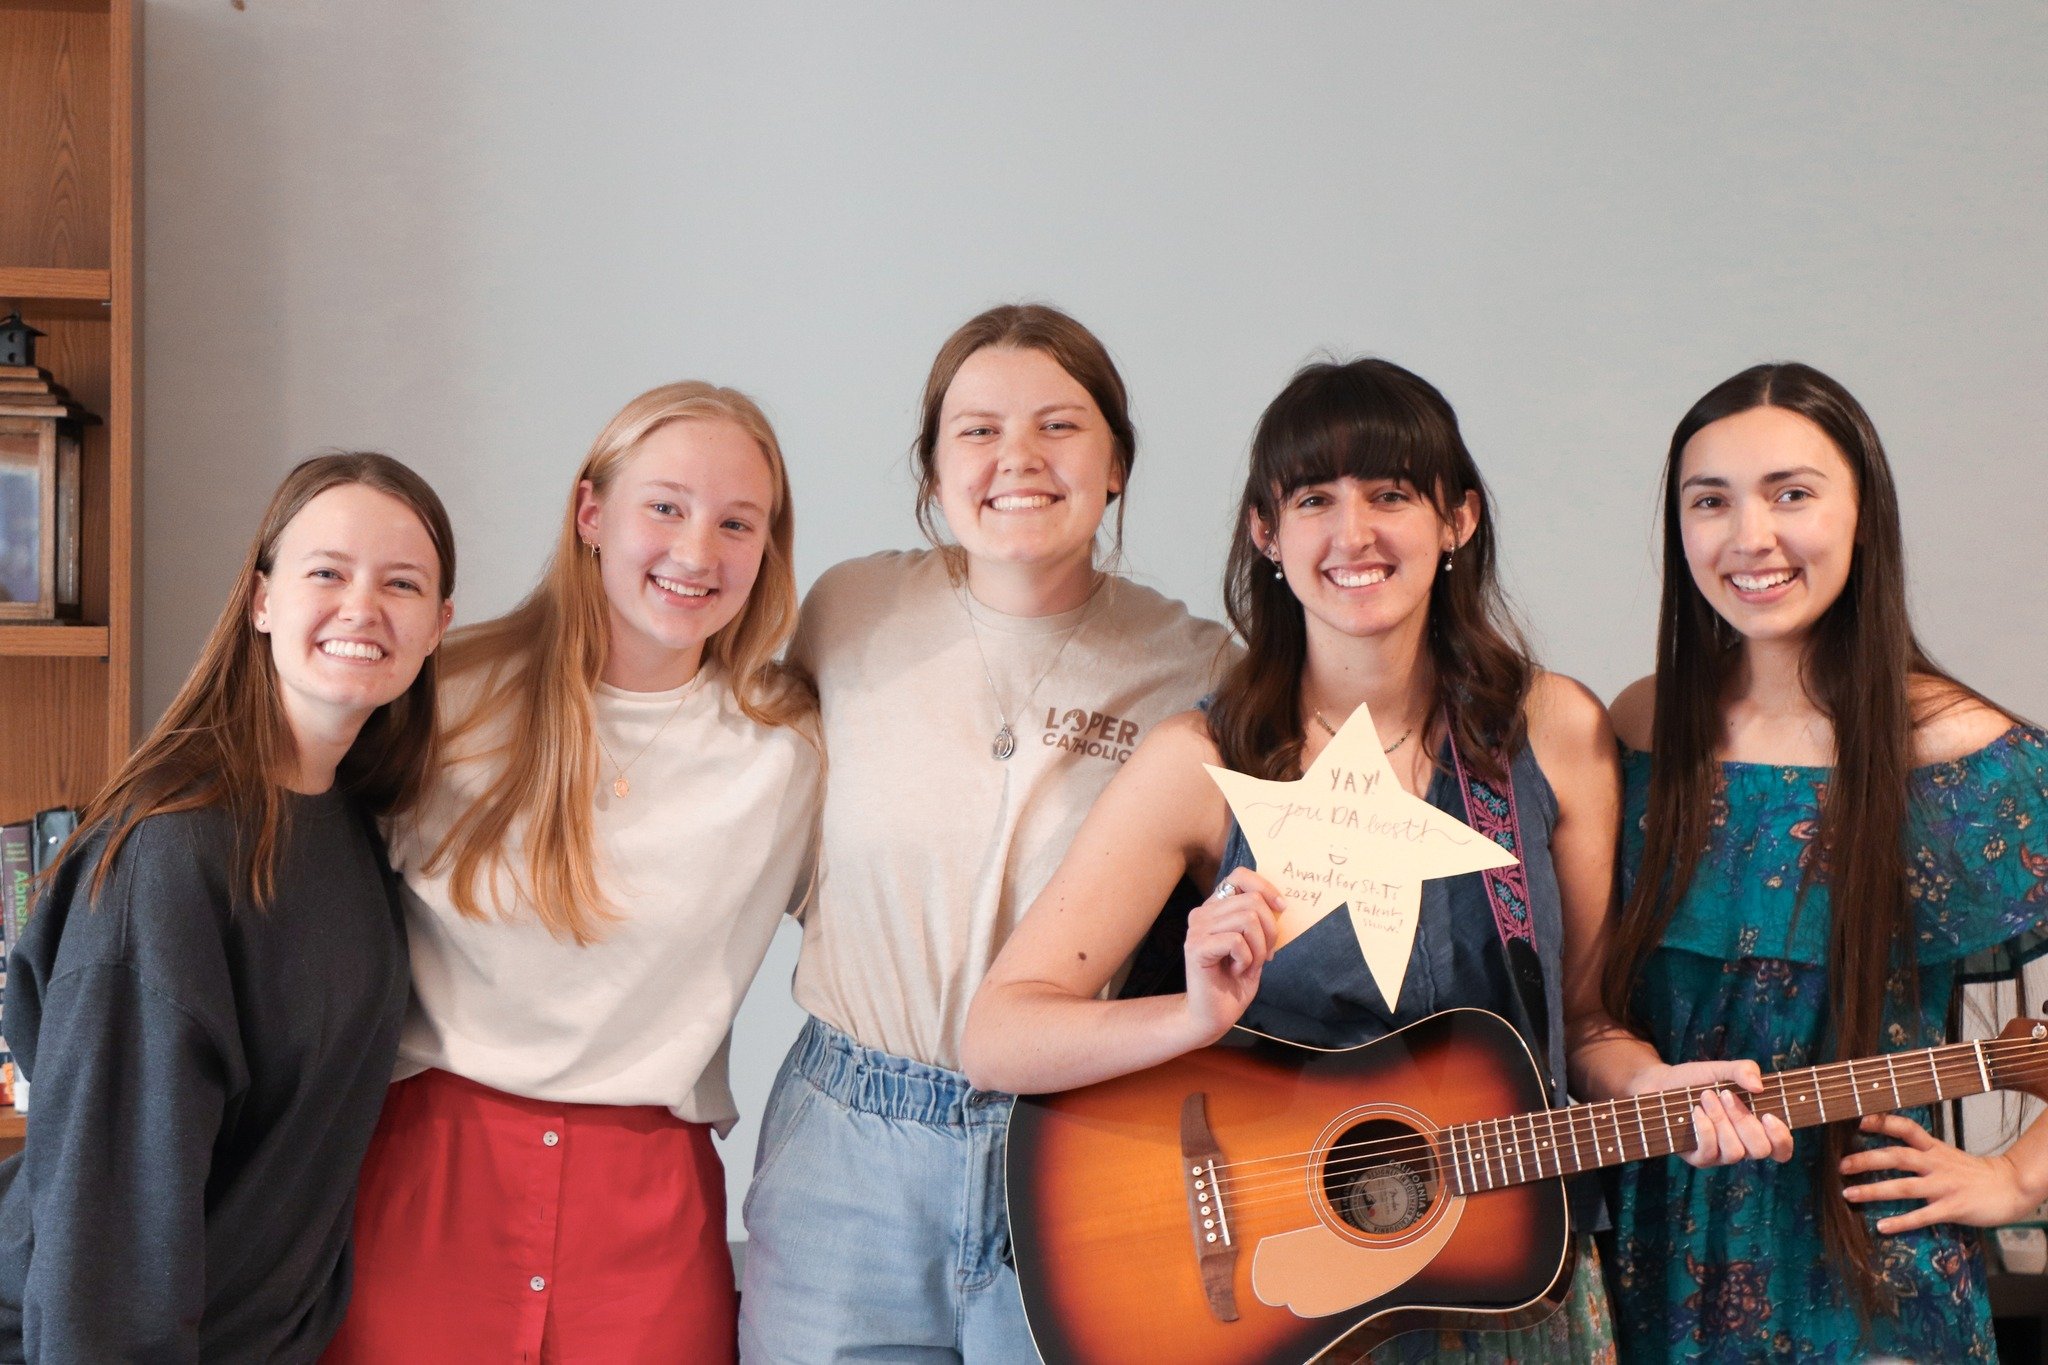 ST. T'S GOT TALENT... and we saw it all on Sunday! These acts ranged from tap dancing, to electric-guitar playing, all the way to reenactments of several iconic videos!

Shoutout to Bonnie and her crew who won with a performance of an original song w